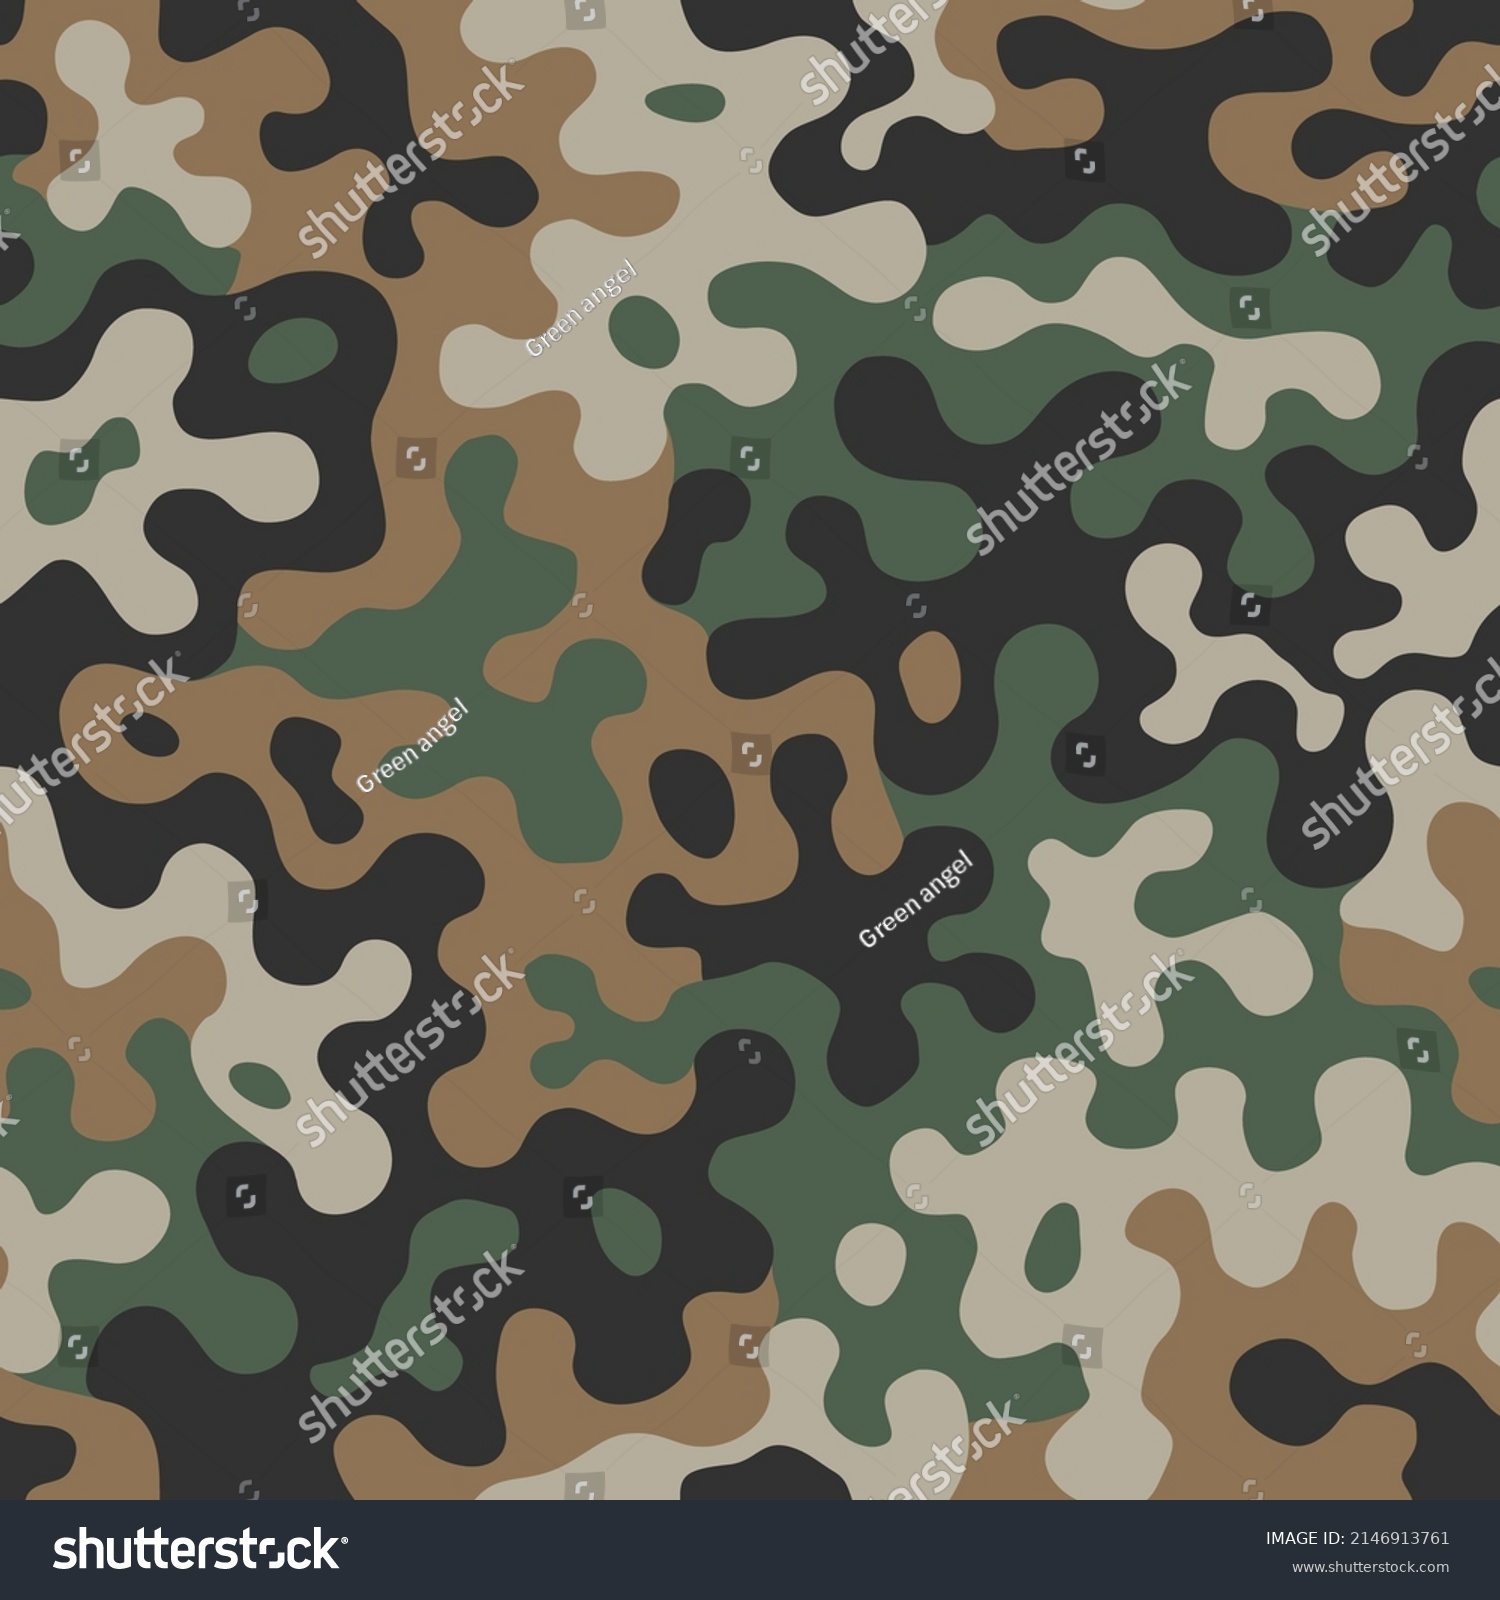 Military Emerald Green Camouflage War Repeats Stock Vector (Royalty ...